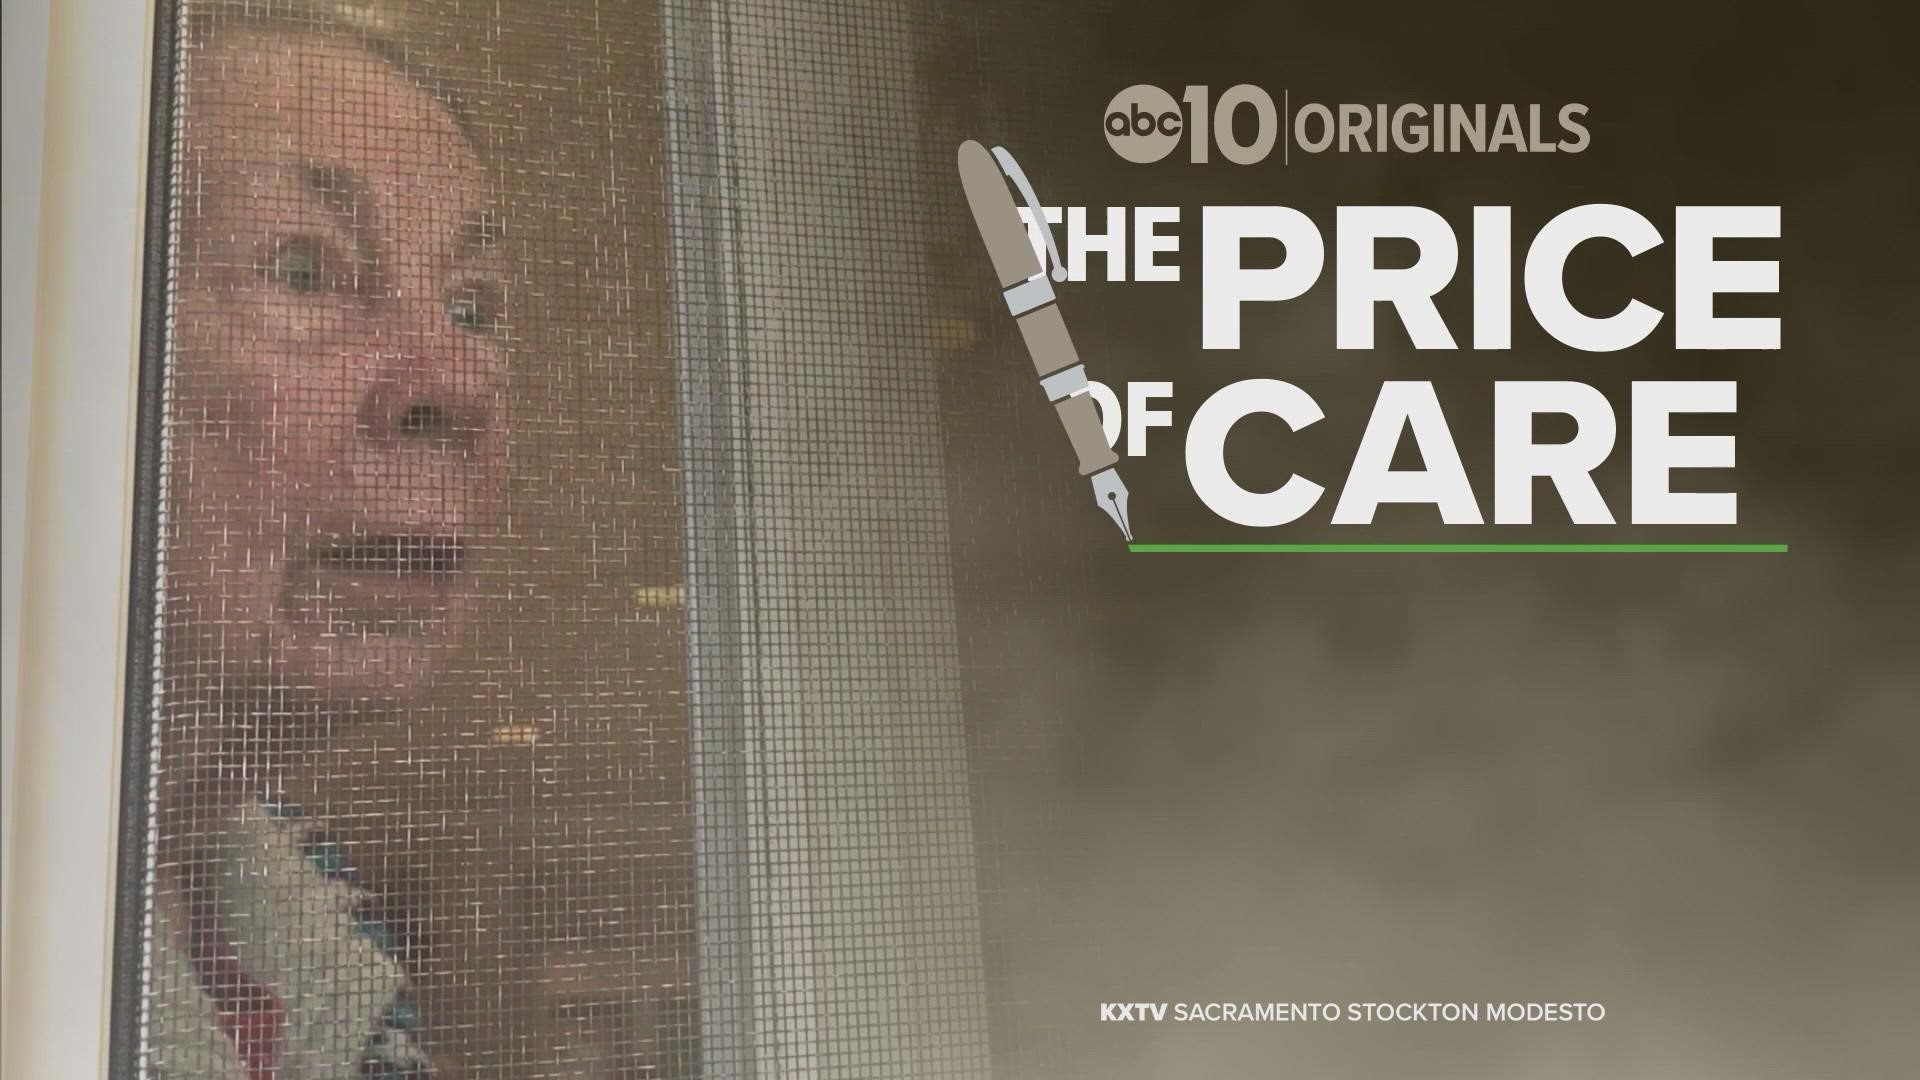 ABC10's investigation dives into the systemic issues of  conservatorships in California and what's being done to regulate this $13-billion-dollar industry.